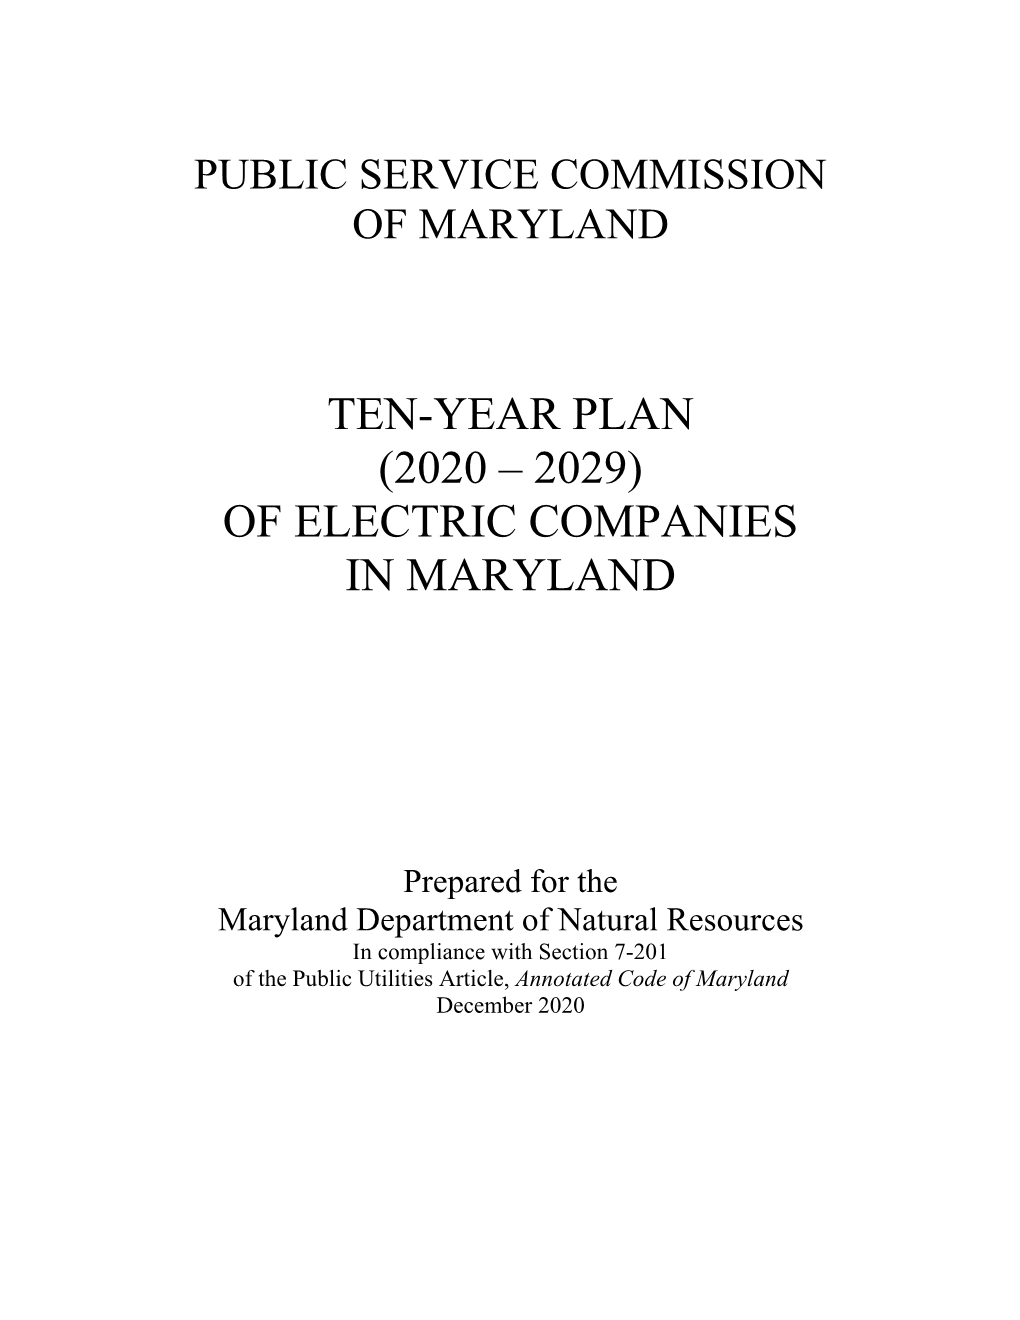 Ten-Year Plan (2020 – 2029) of Electric Companies in Maryland